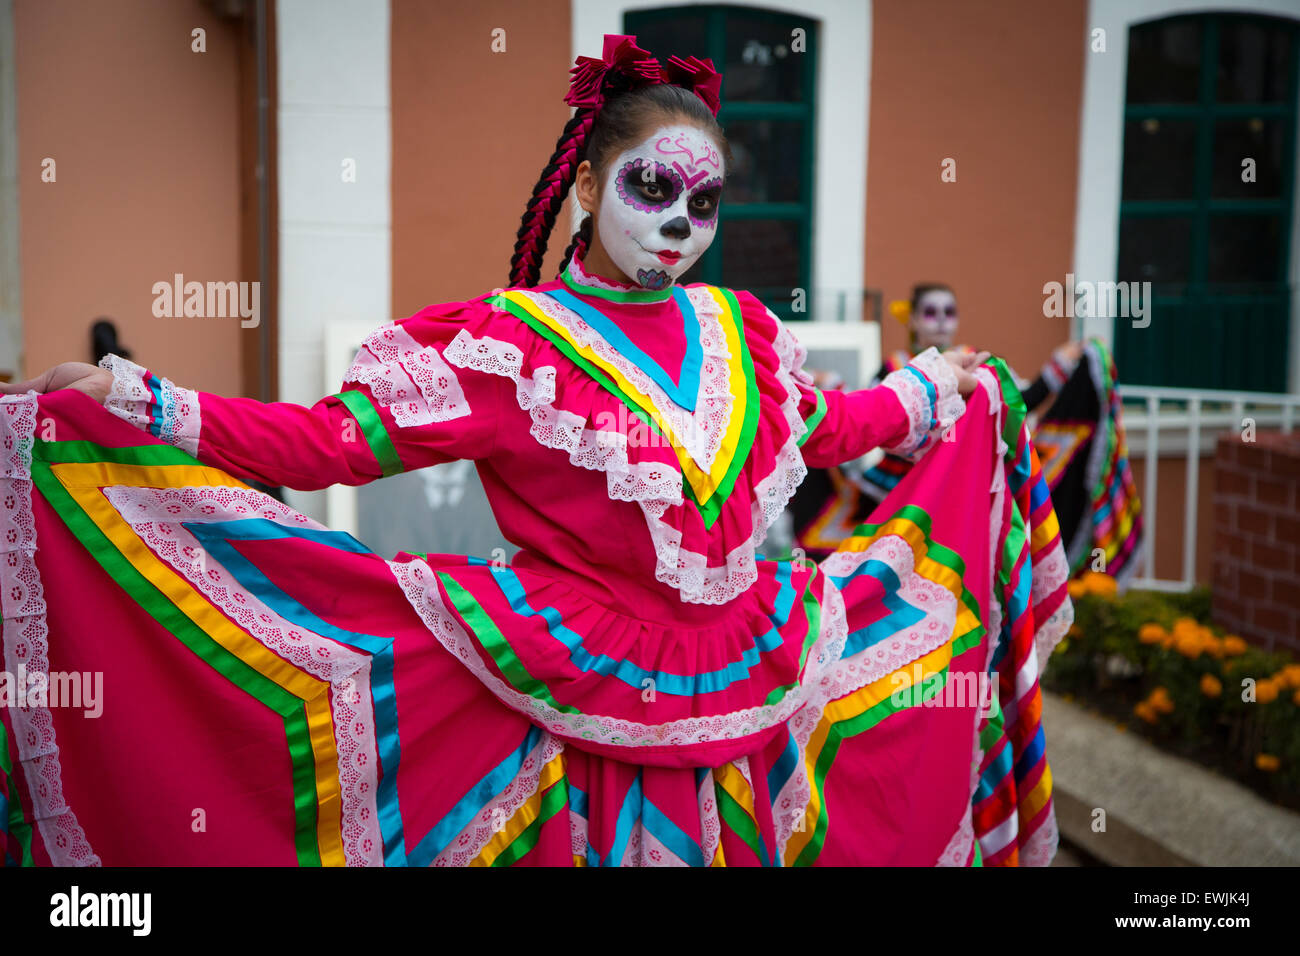 A Mexican girl dressed up to celebrate the Day of the Dead holiday in Mexico Stock Photo